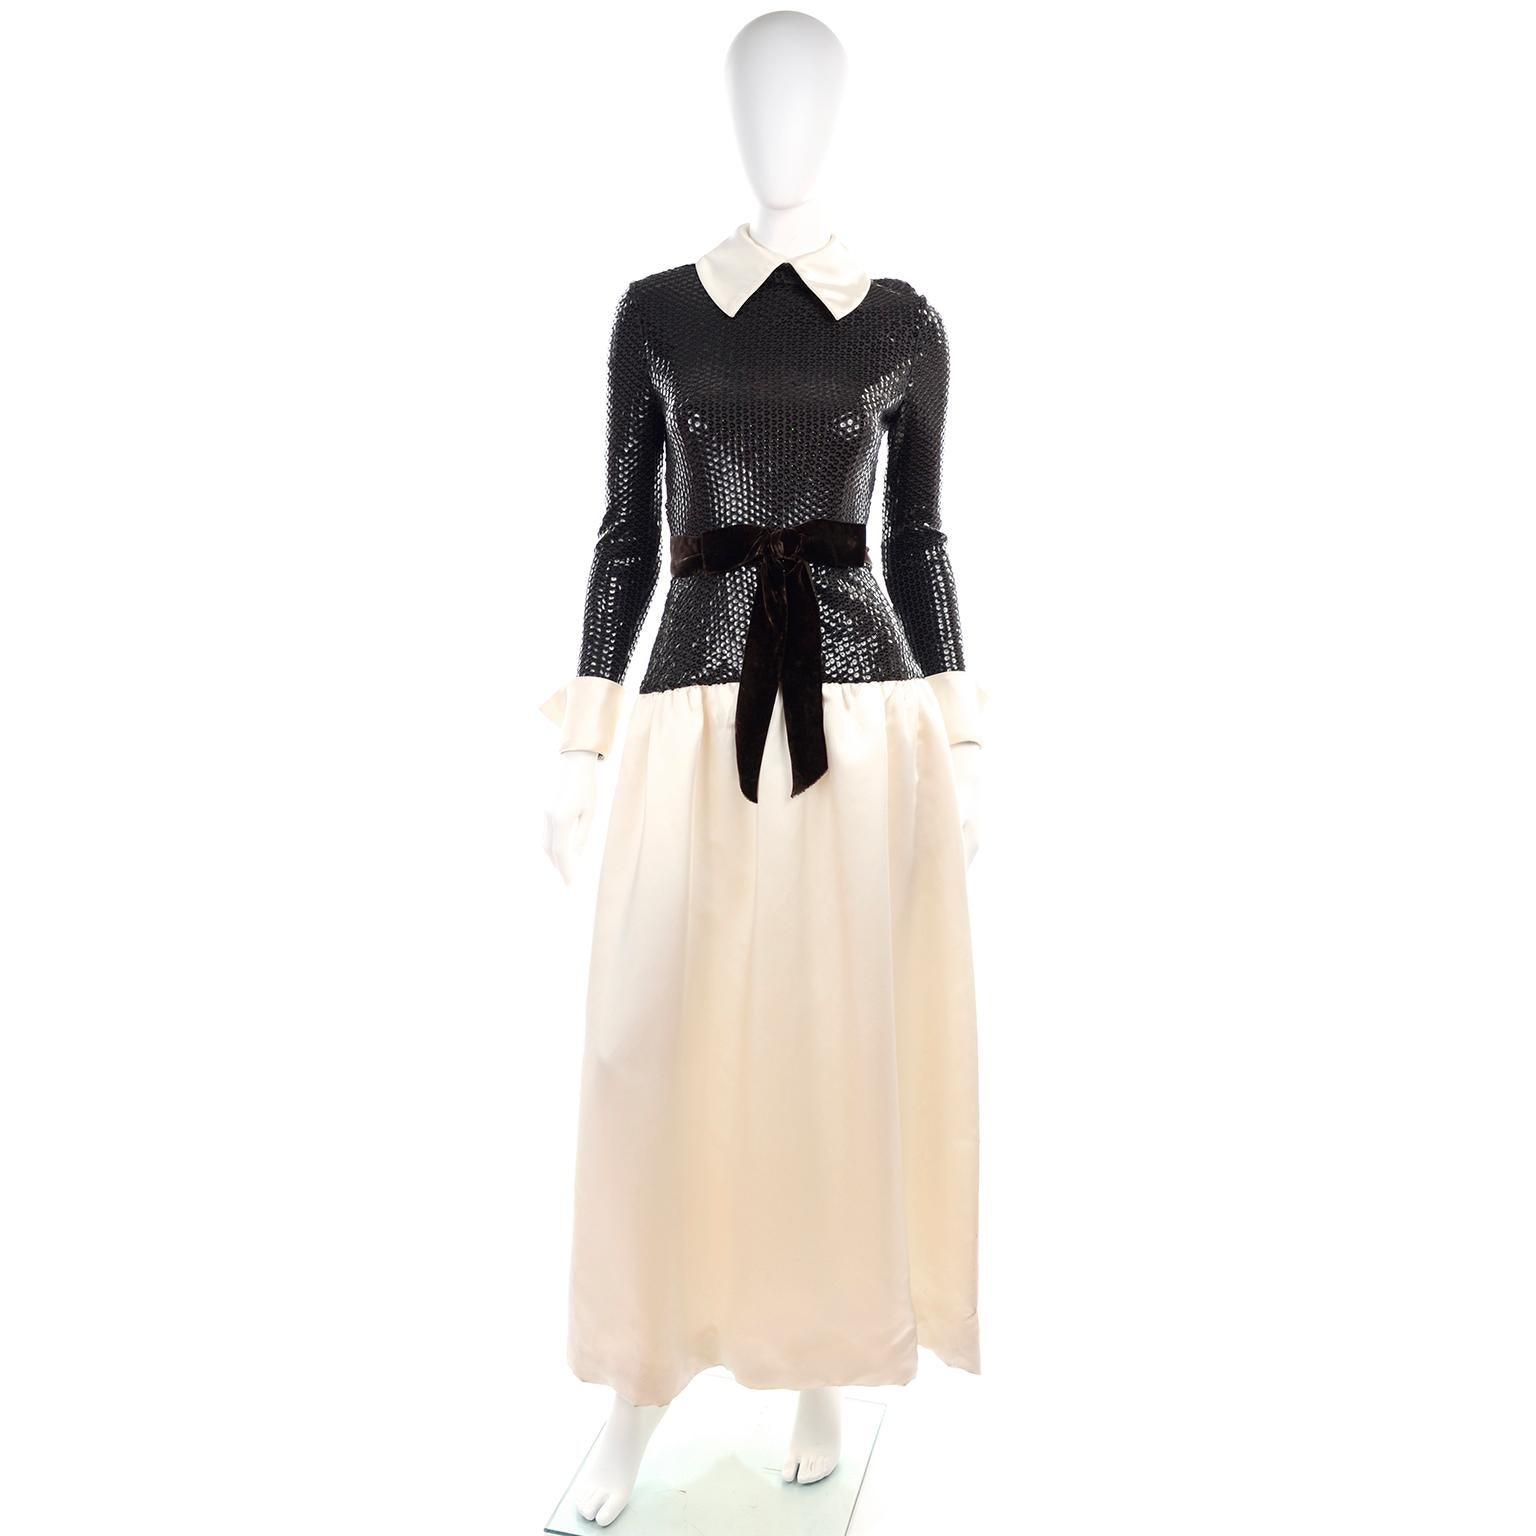 This is a lovely vintage dress designed by Kiki Hart in the late 1960's or early 1970's.  The dress has a brown/black sequin bodice and ivory satin long skirt, cuffs and collar.  .The dress has a brown velvet belt and 2 functional pockets. There is